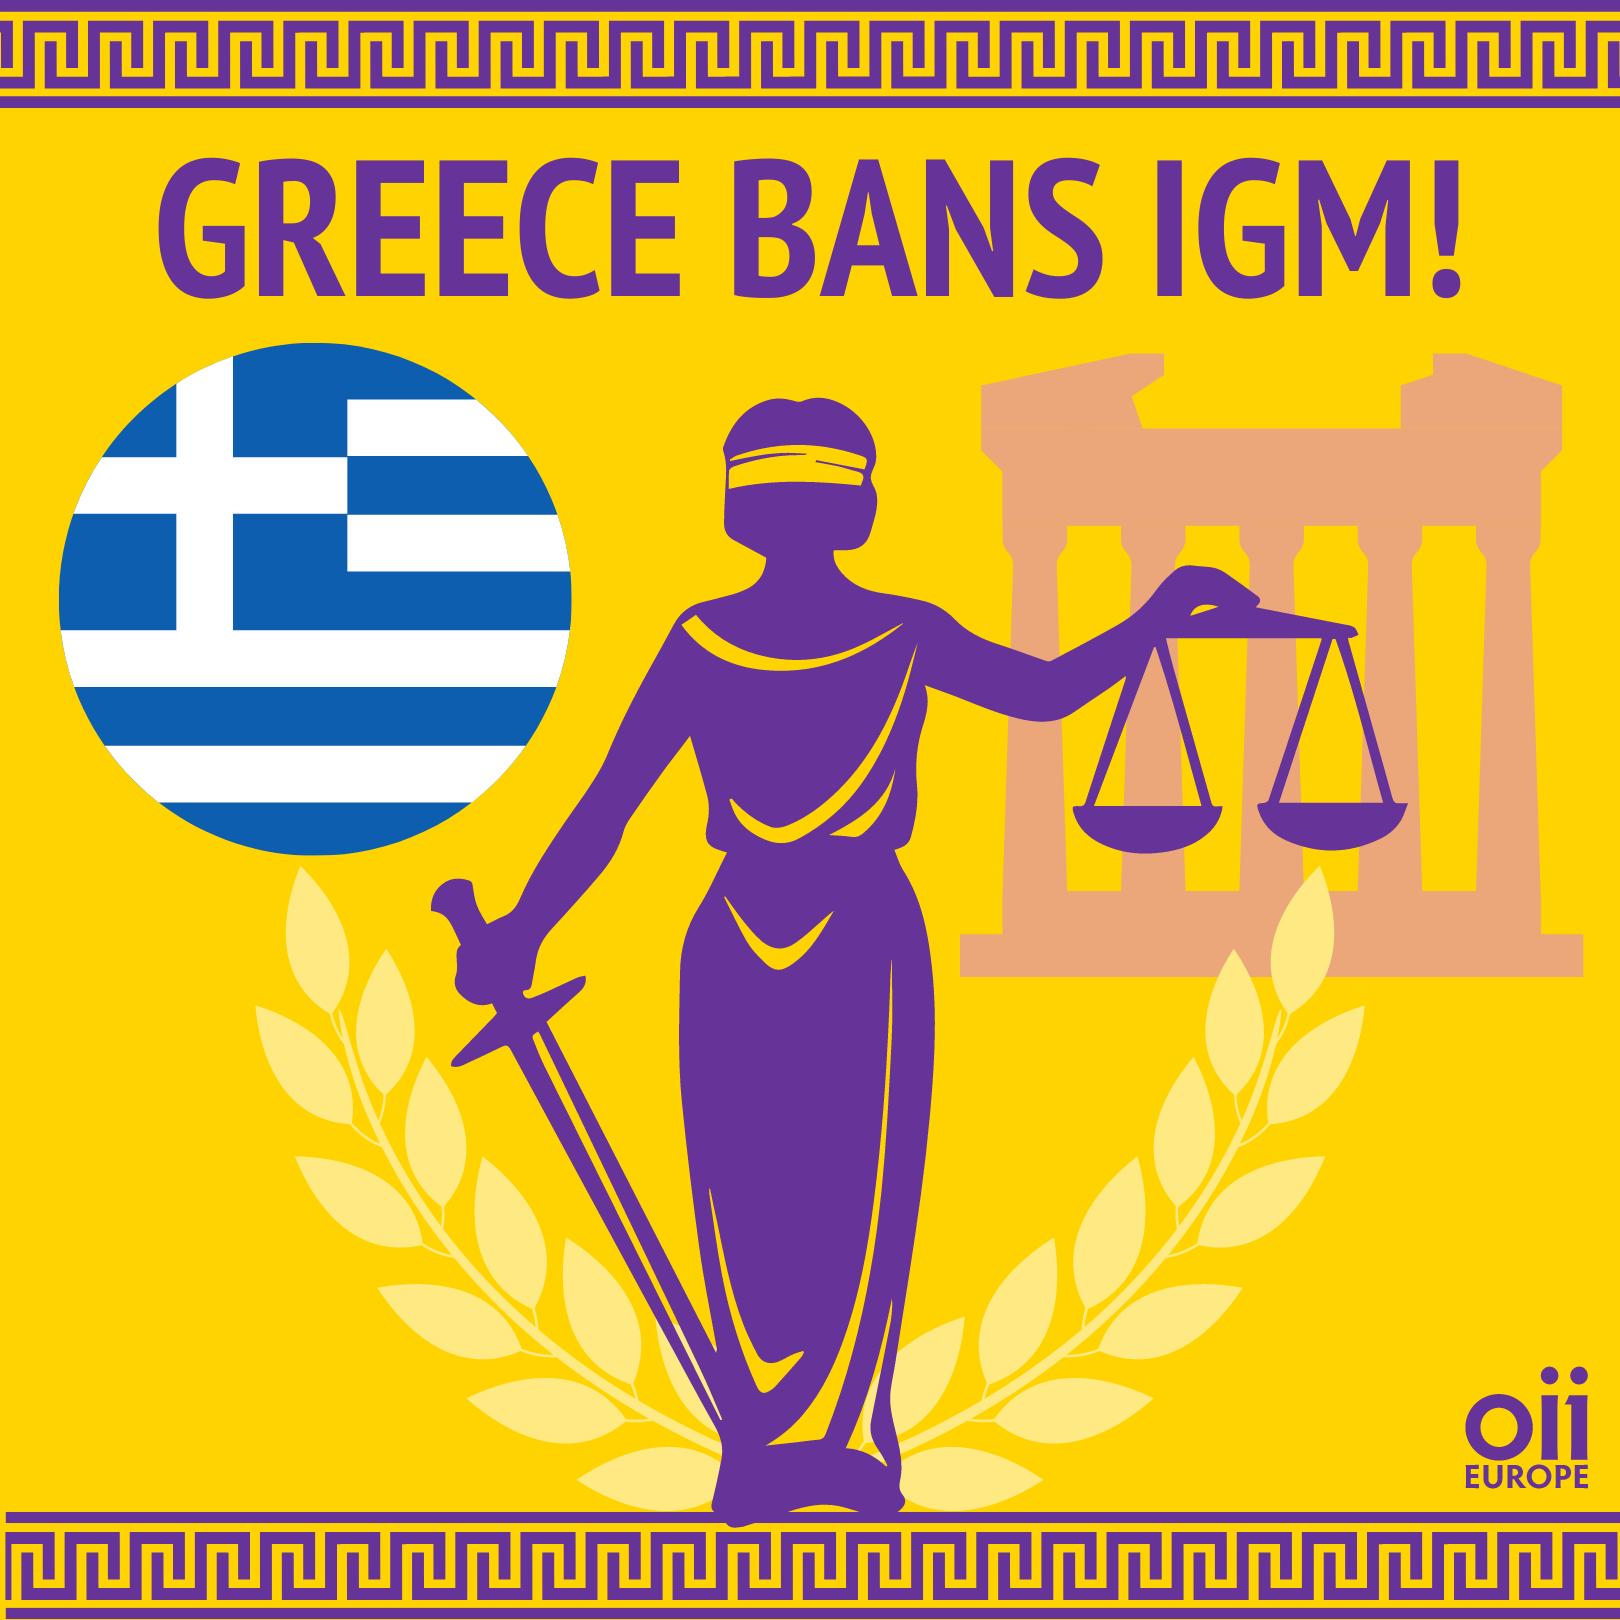 Landmark moment as Greek Parliament votes to ban IGM and protect the human rights of intersex minors